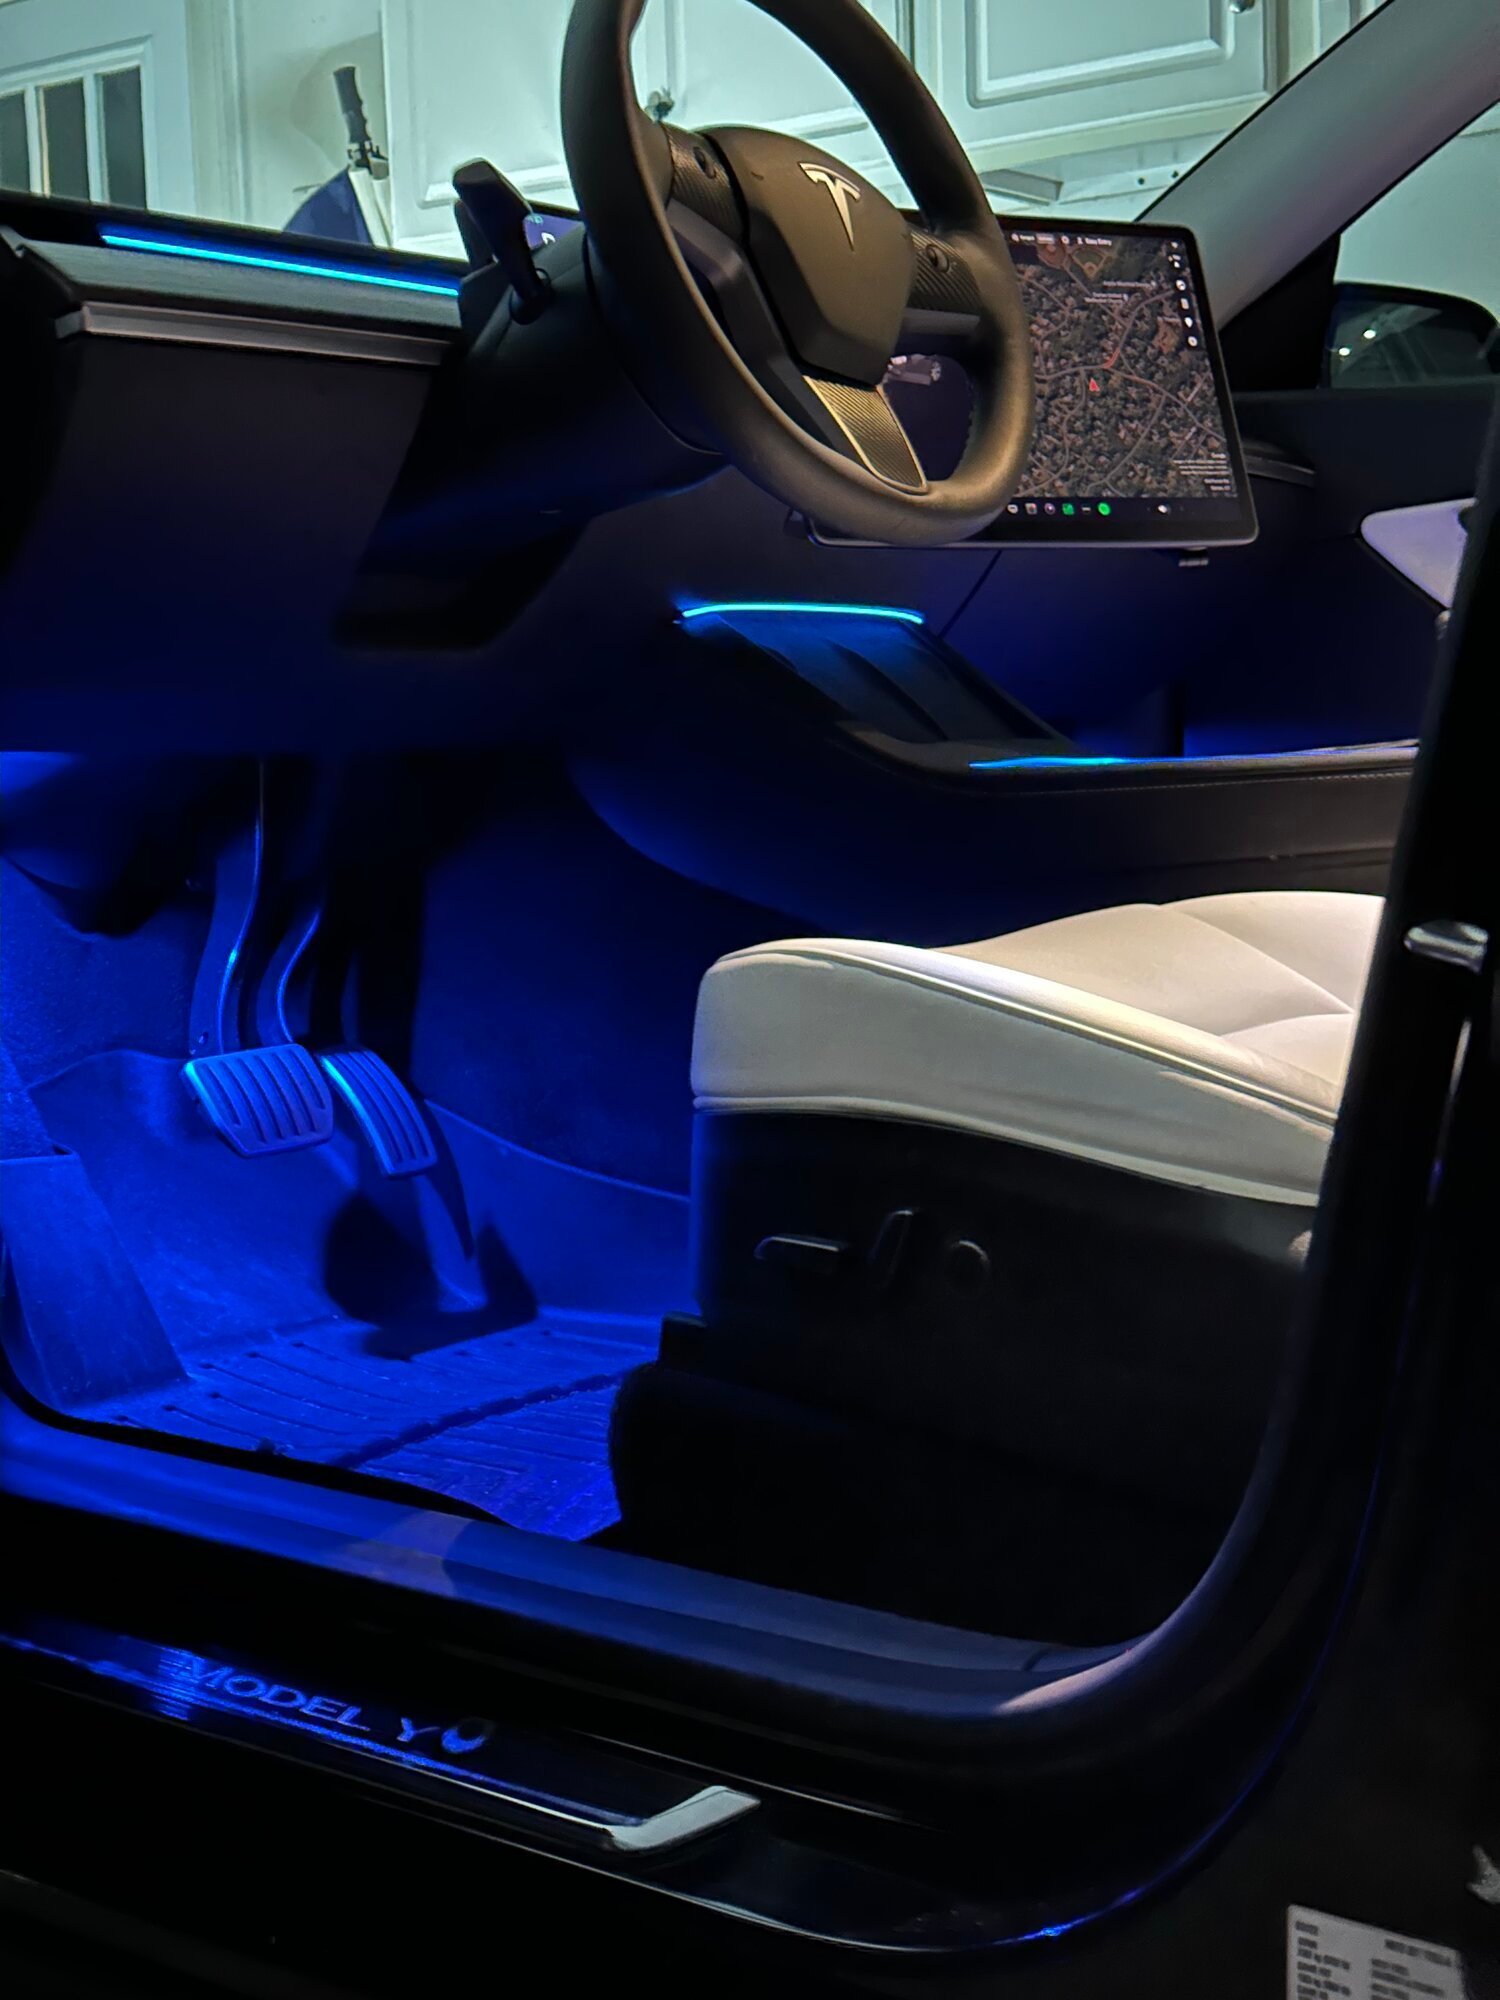 Ambient Lighting that Integrates with Model Y like the Highland Refresh?